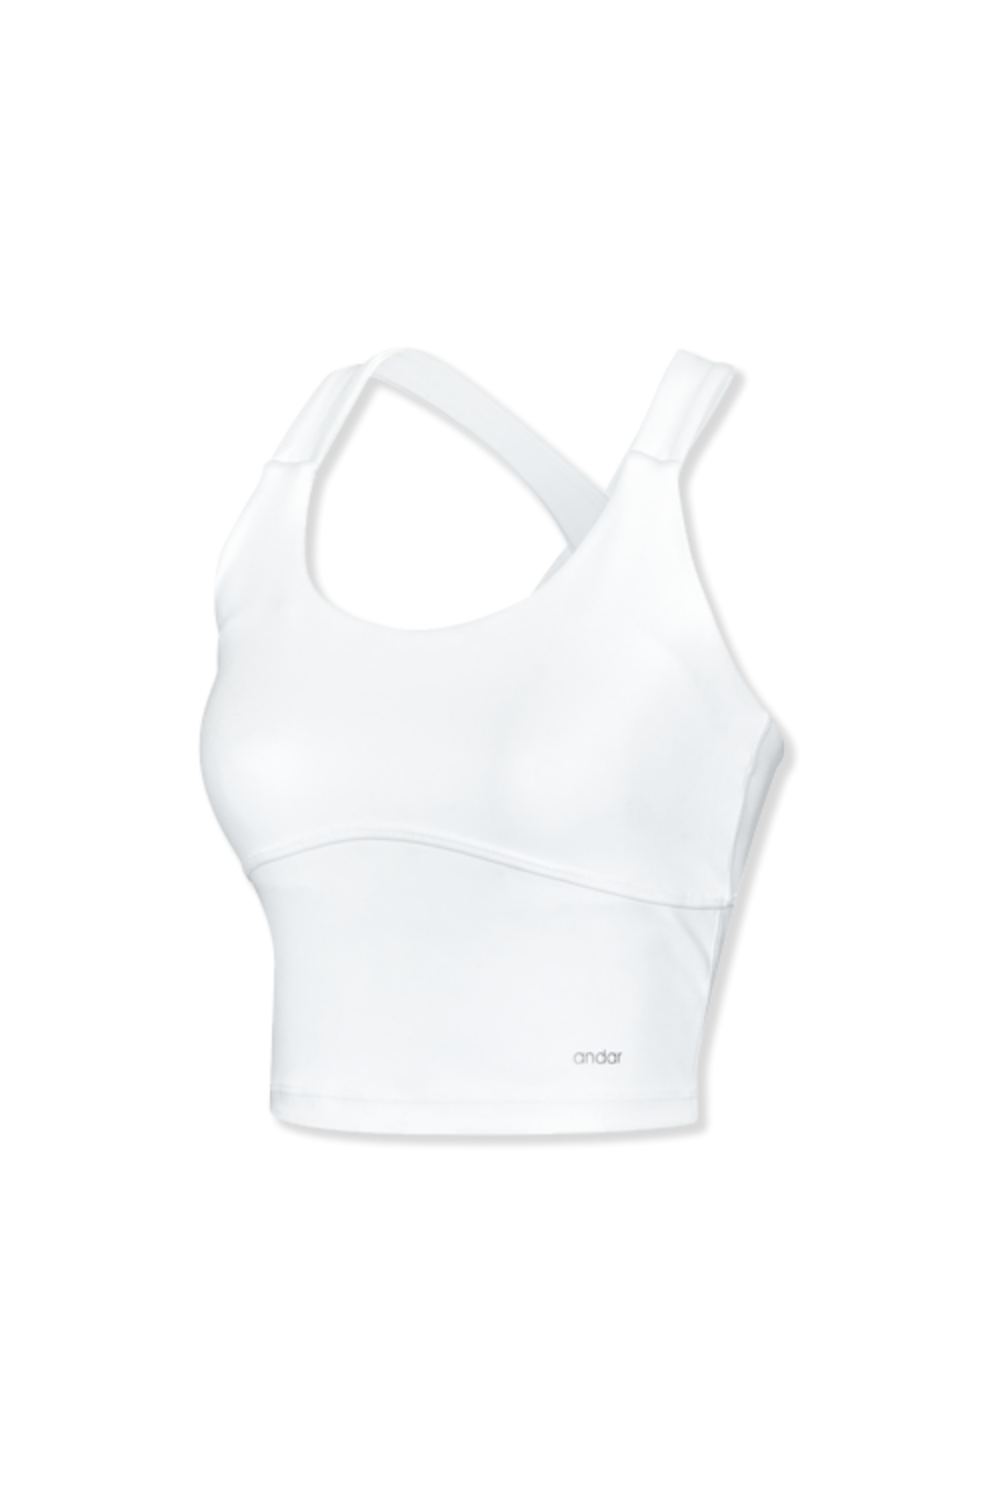 Aircooling Crop Top , A/B cups